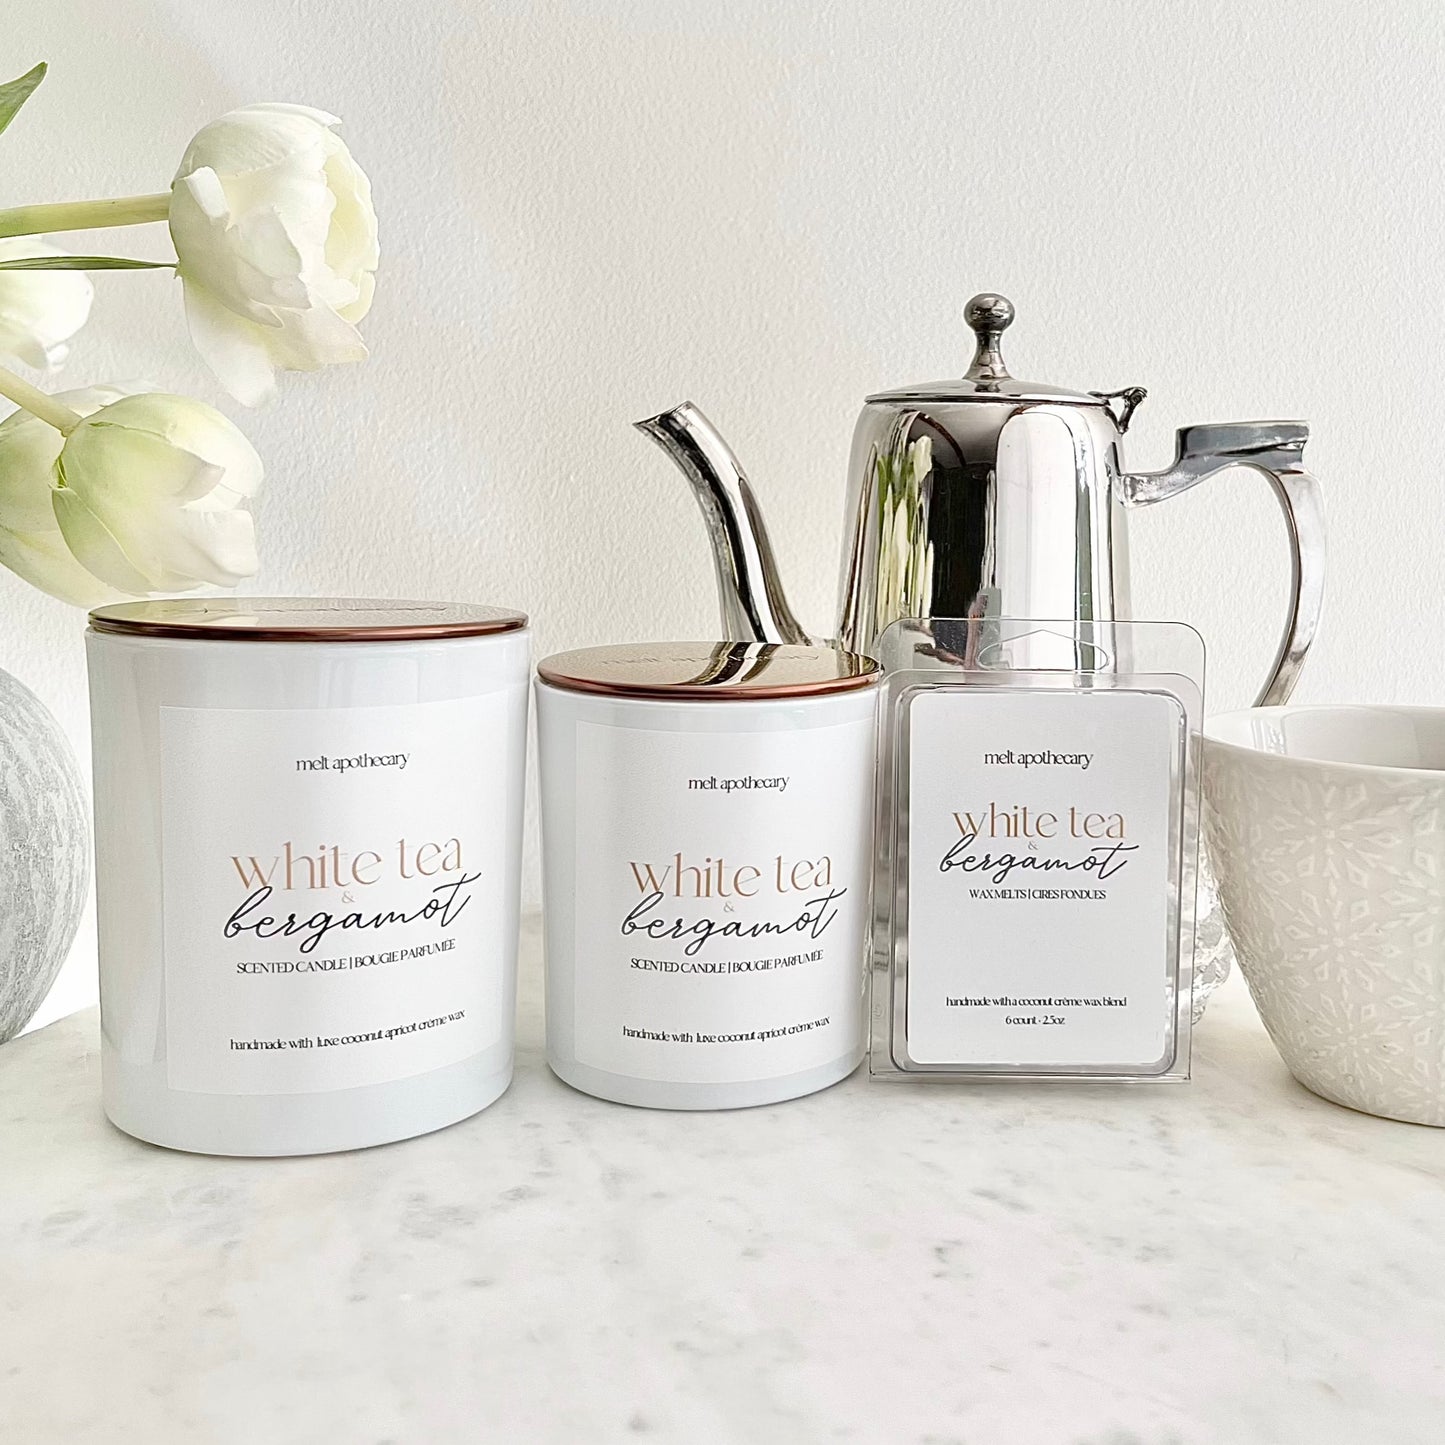 the white tea & bergamot collection including the 12oz candle, 7.5oz candle and wax melts